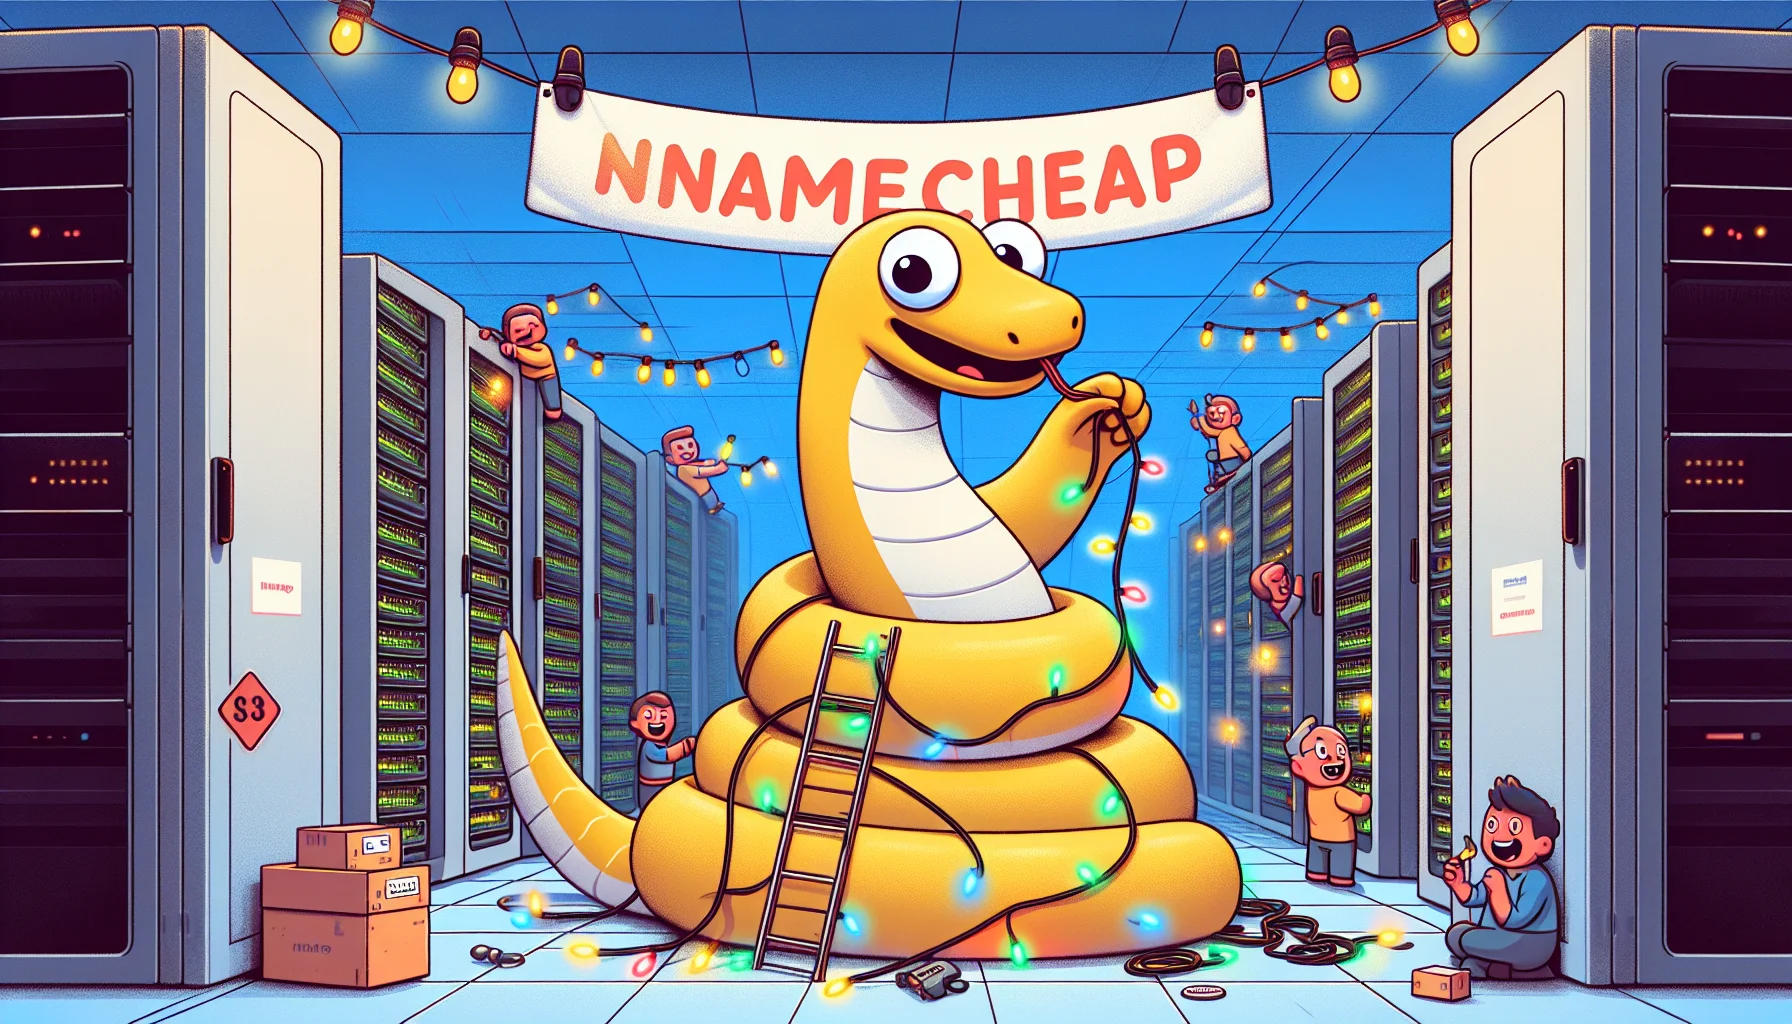 Create a humorous and realistic visual representation of an anthropomorphic version of Django, depicted as a python slithering its way through servers in a data center. The Python is stringing lights around the server stacks, making them look like a festive Christmas tree, implying the ease of web hosting setup. A banner hanging overhead, playfully reading 'Namecheap', underscores the affordability of the services. The surrounding scenes depict excited humans of various descents and genders engaged in tasls related to web development.